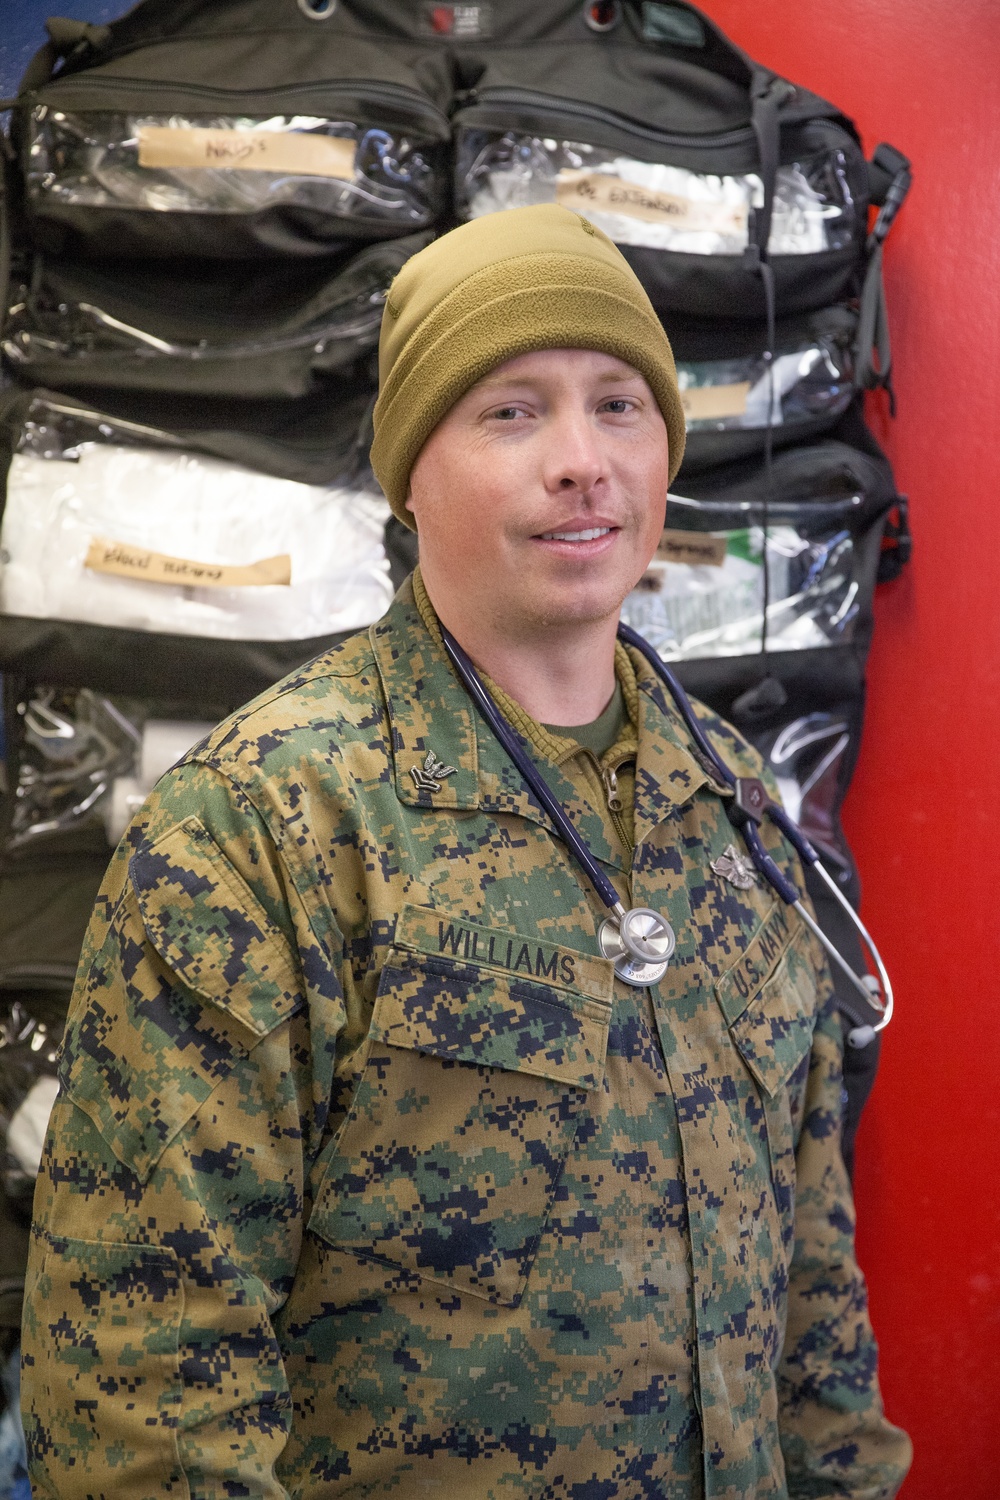 15th MEU faces of Northern Edge 2021